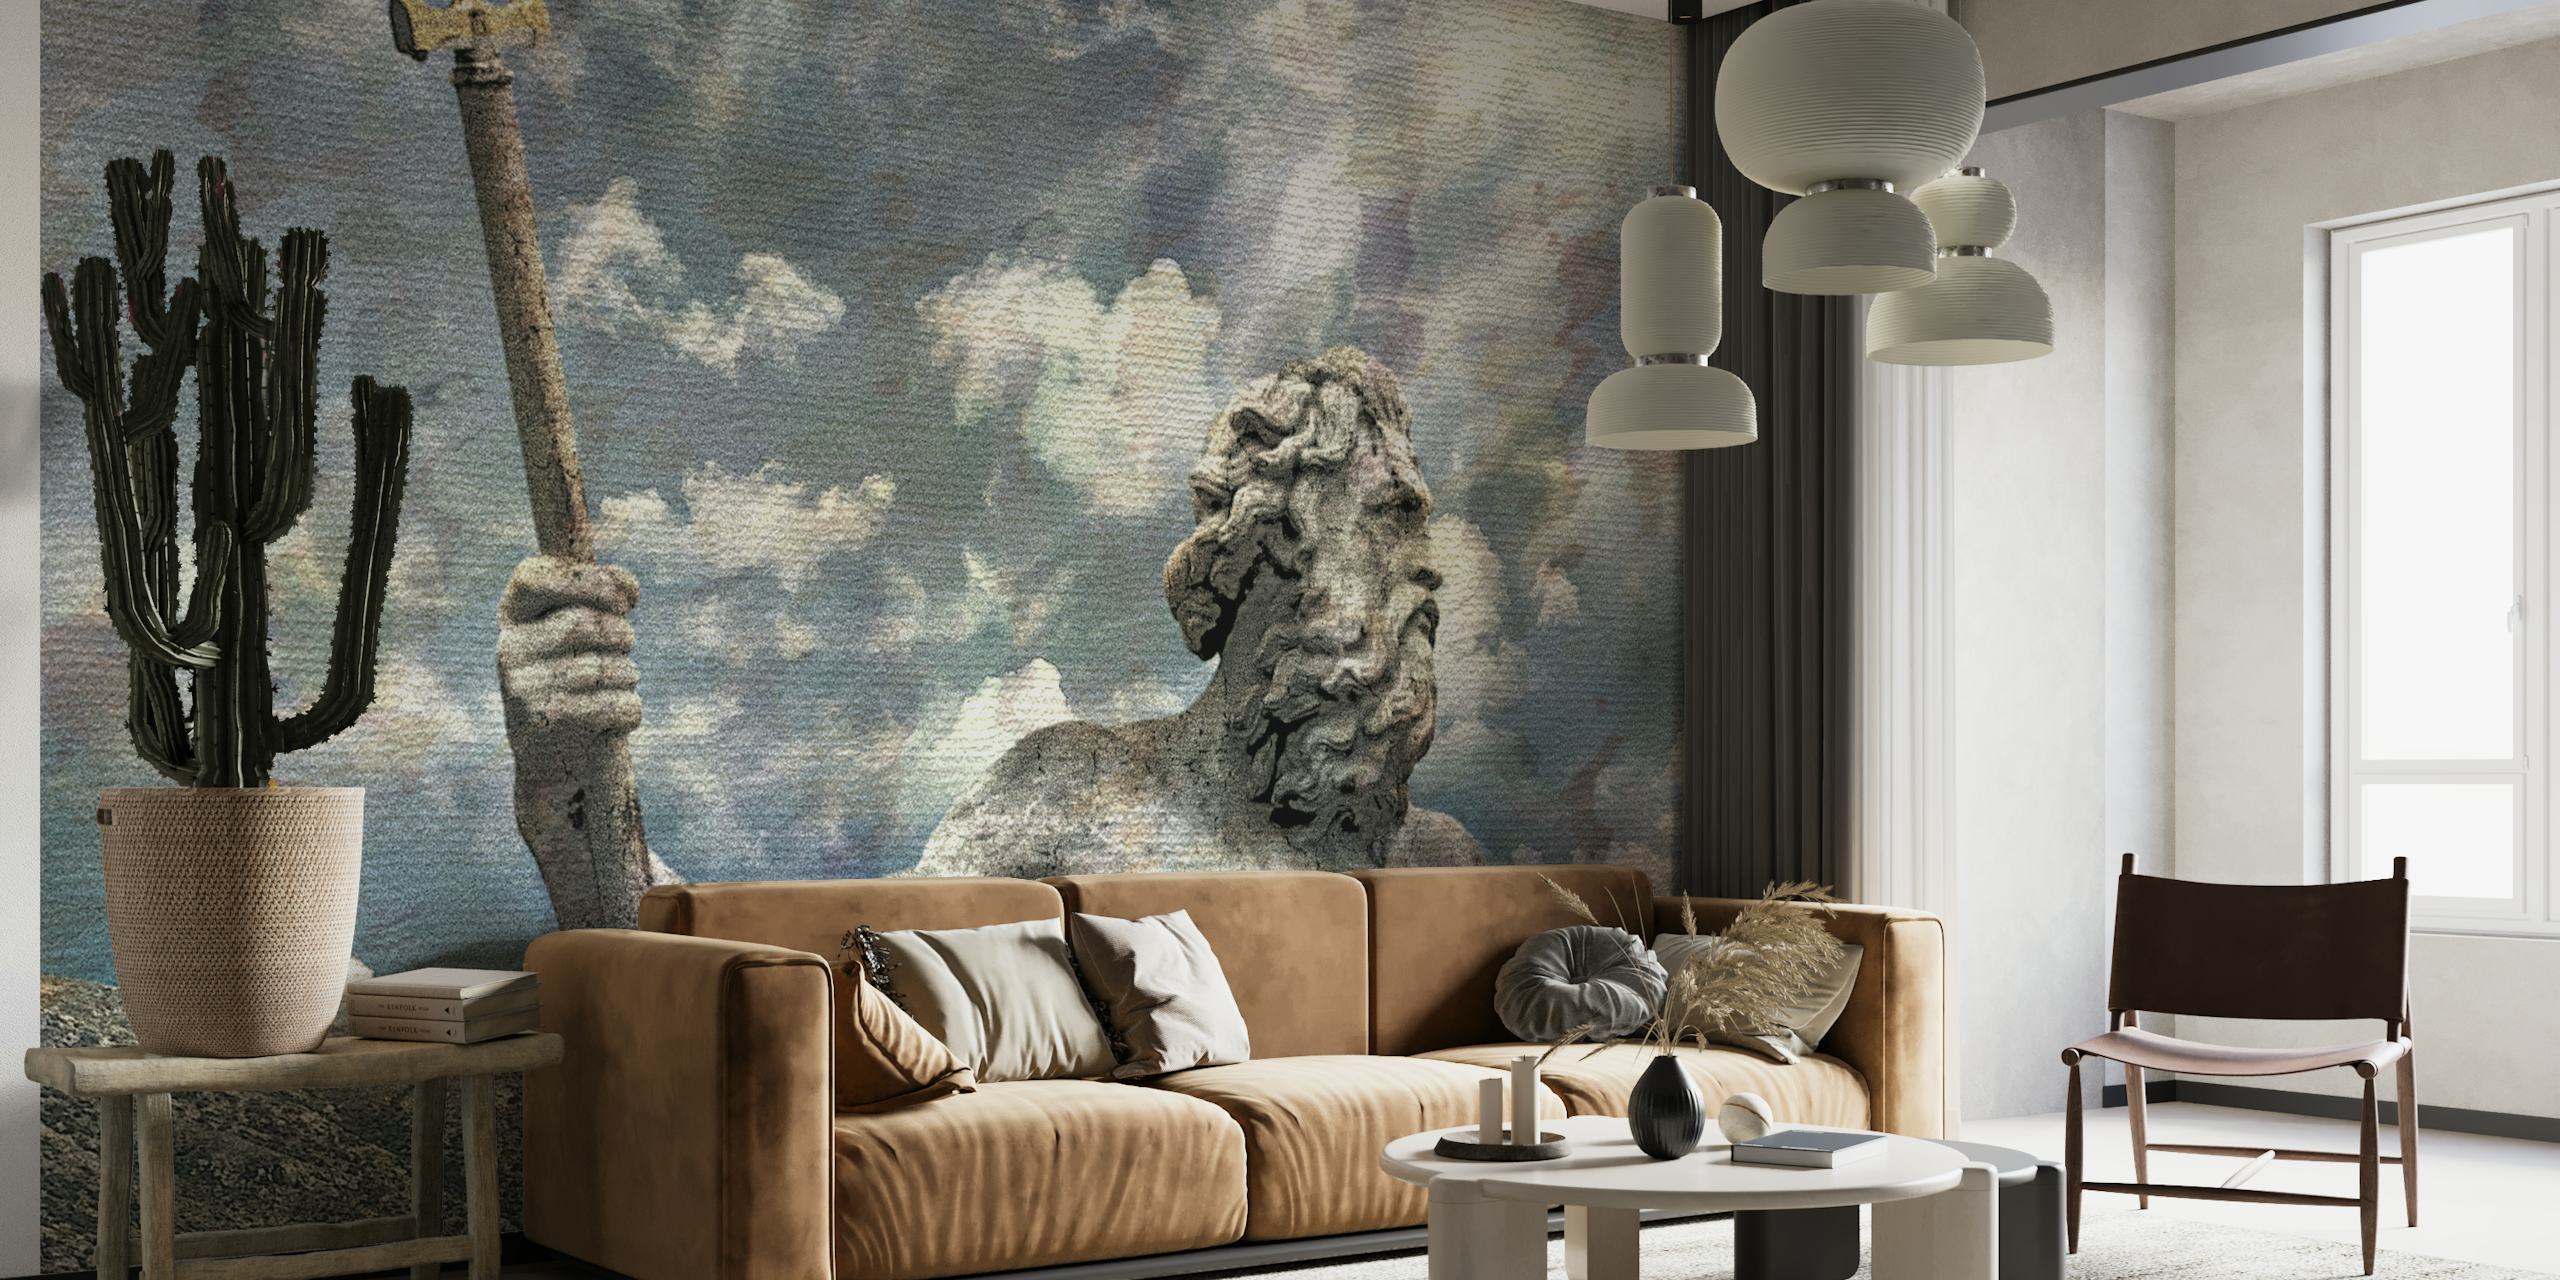 Mystical Poseidon wall mural with god of the sea and cloudy skies